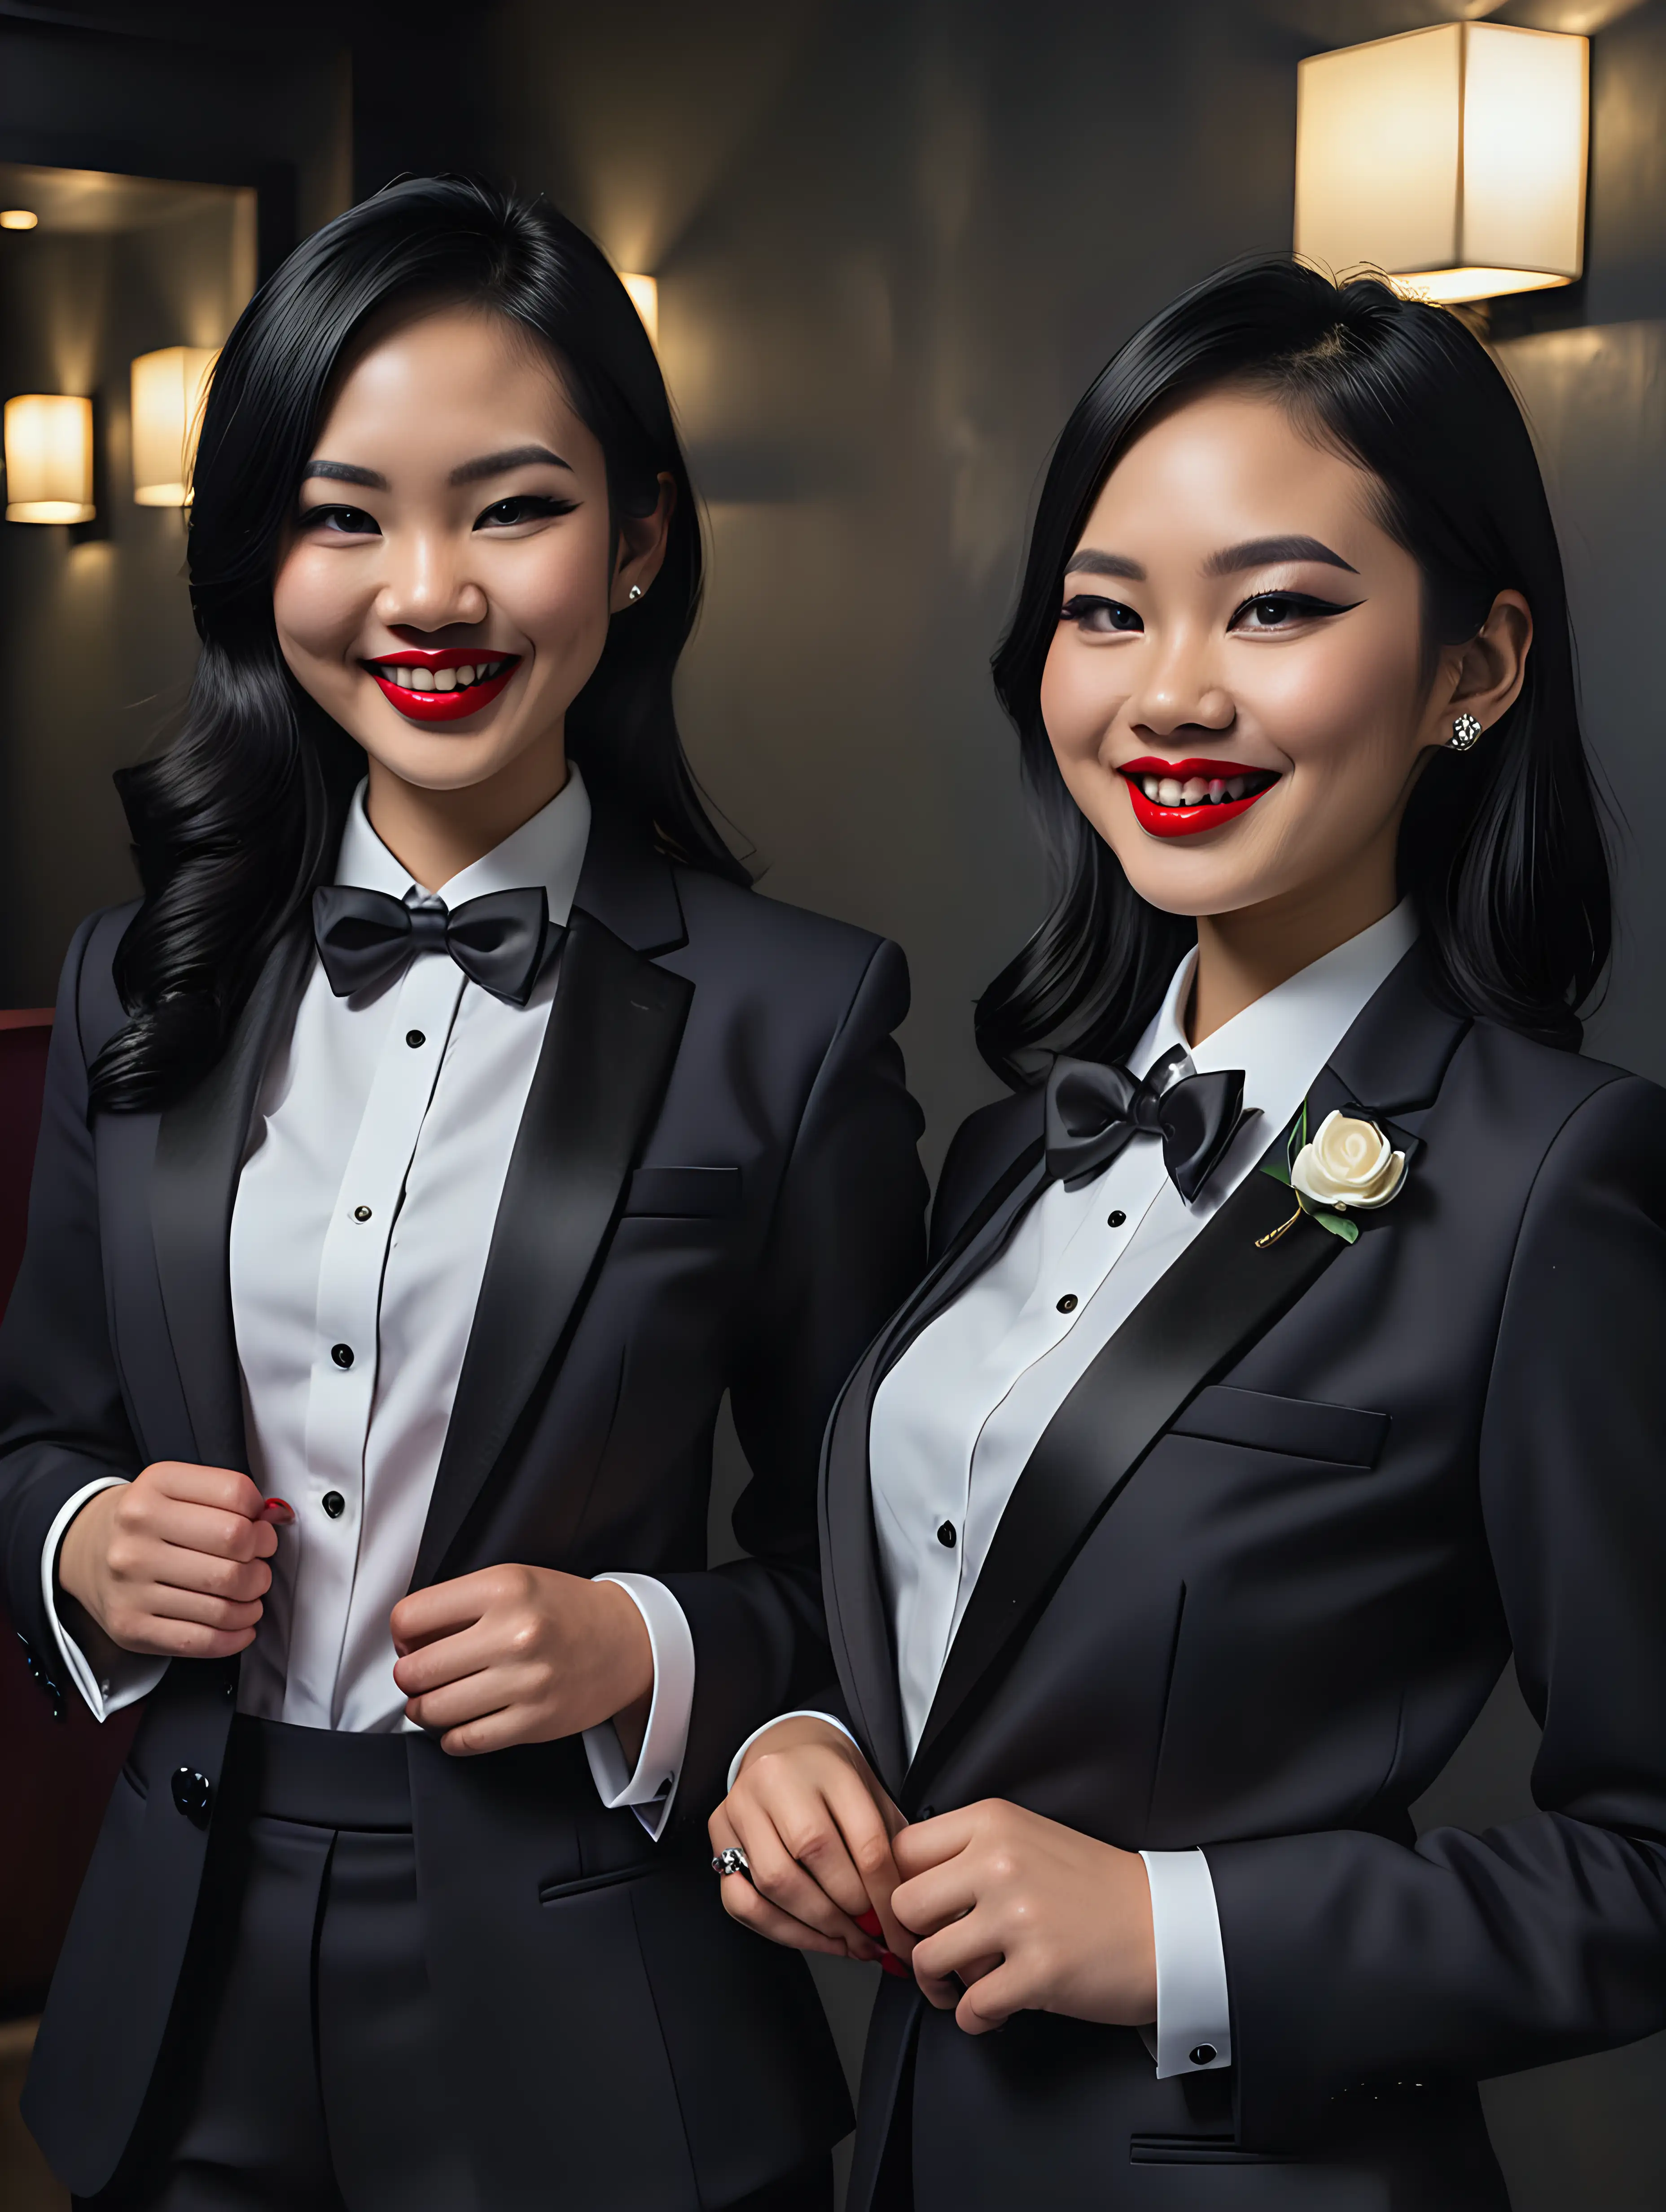 Two-Stylish-Vietnamese-Women-in-Matching-Tuxedos-with-Corsages-Smiling-in-Dimly-Lit-Room